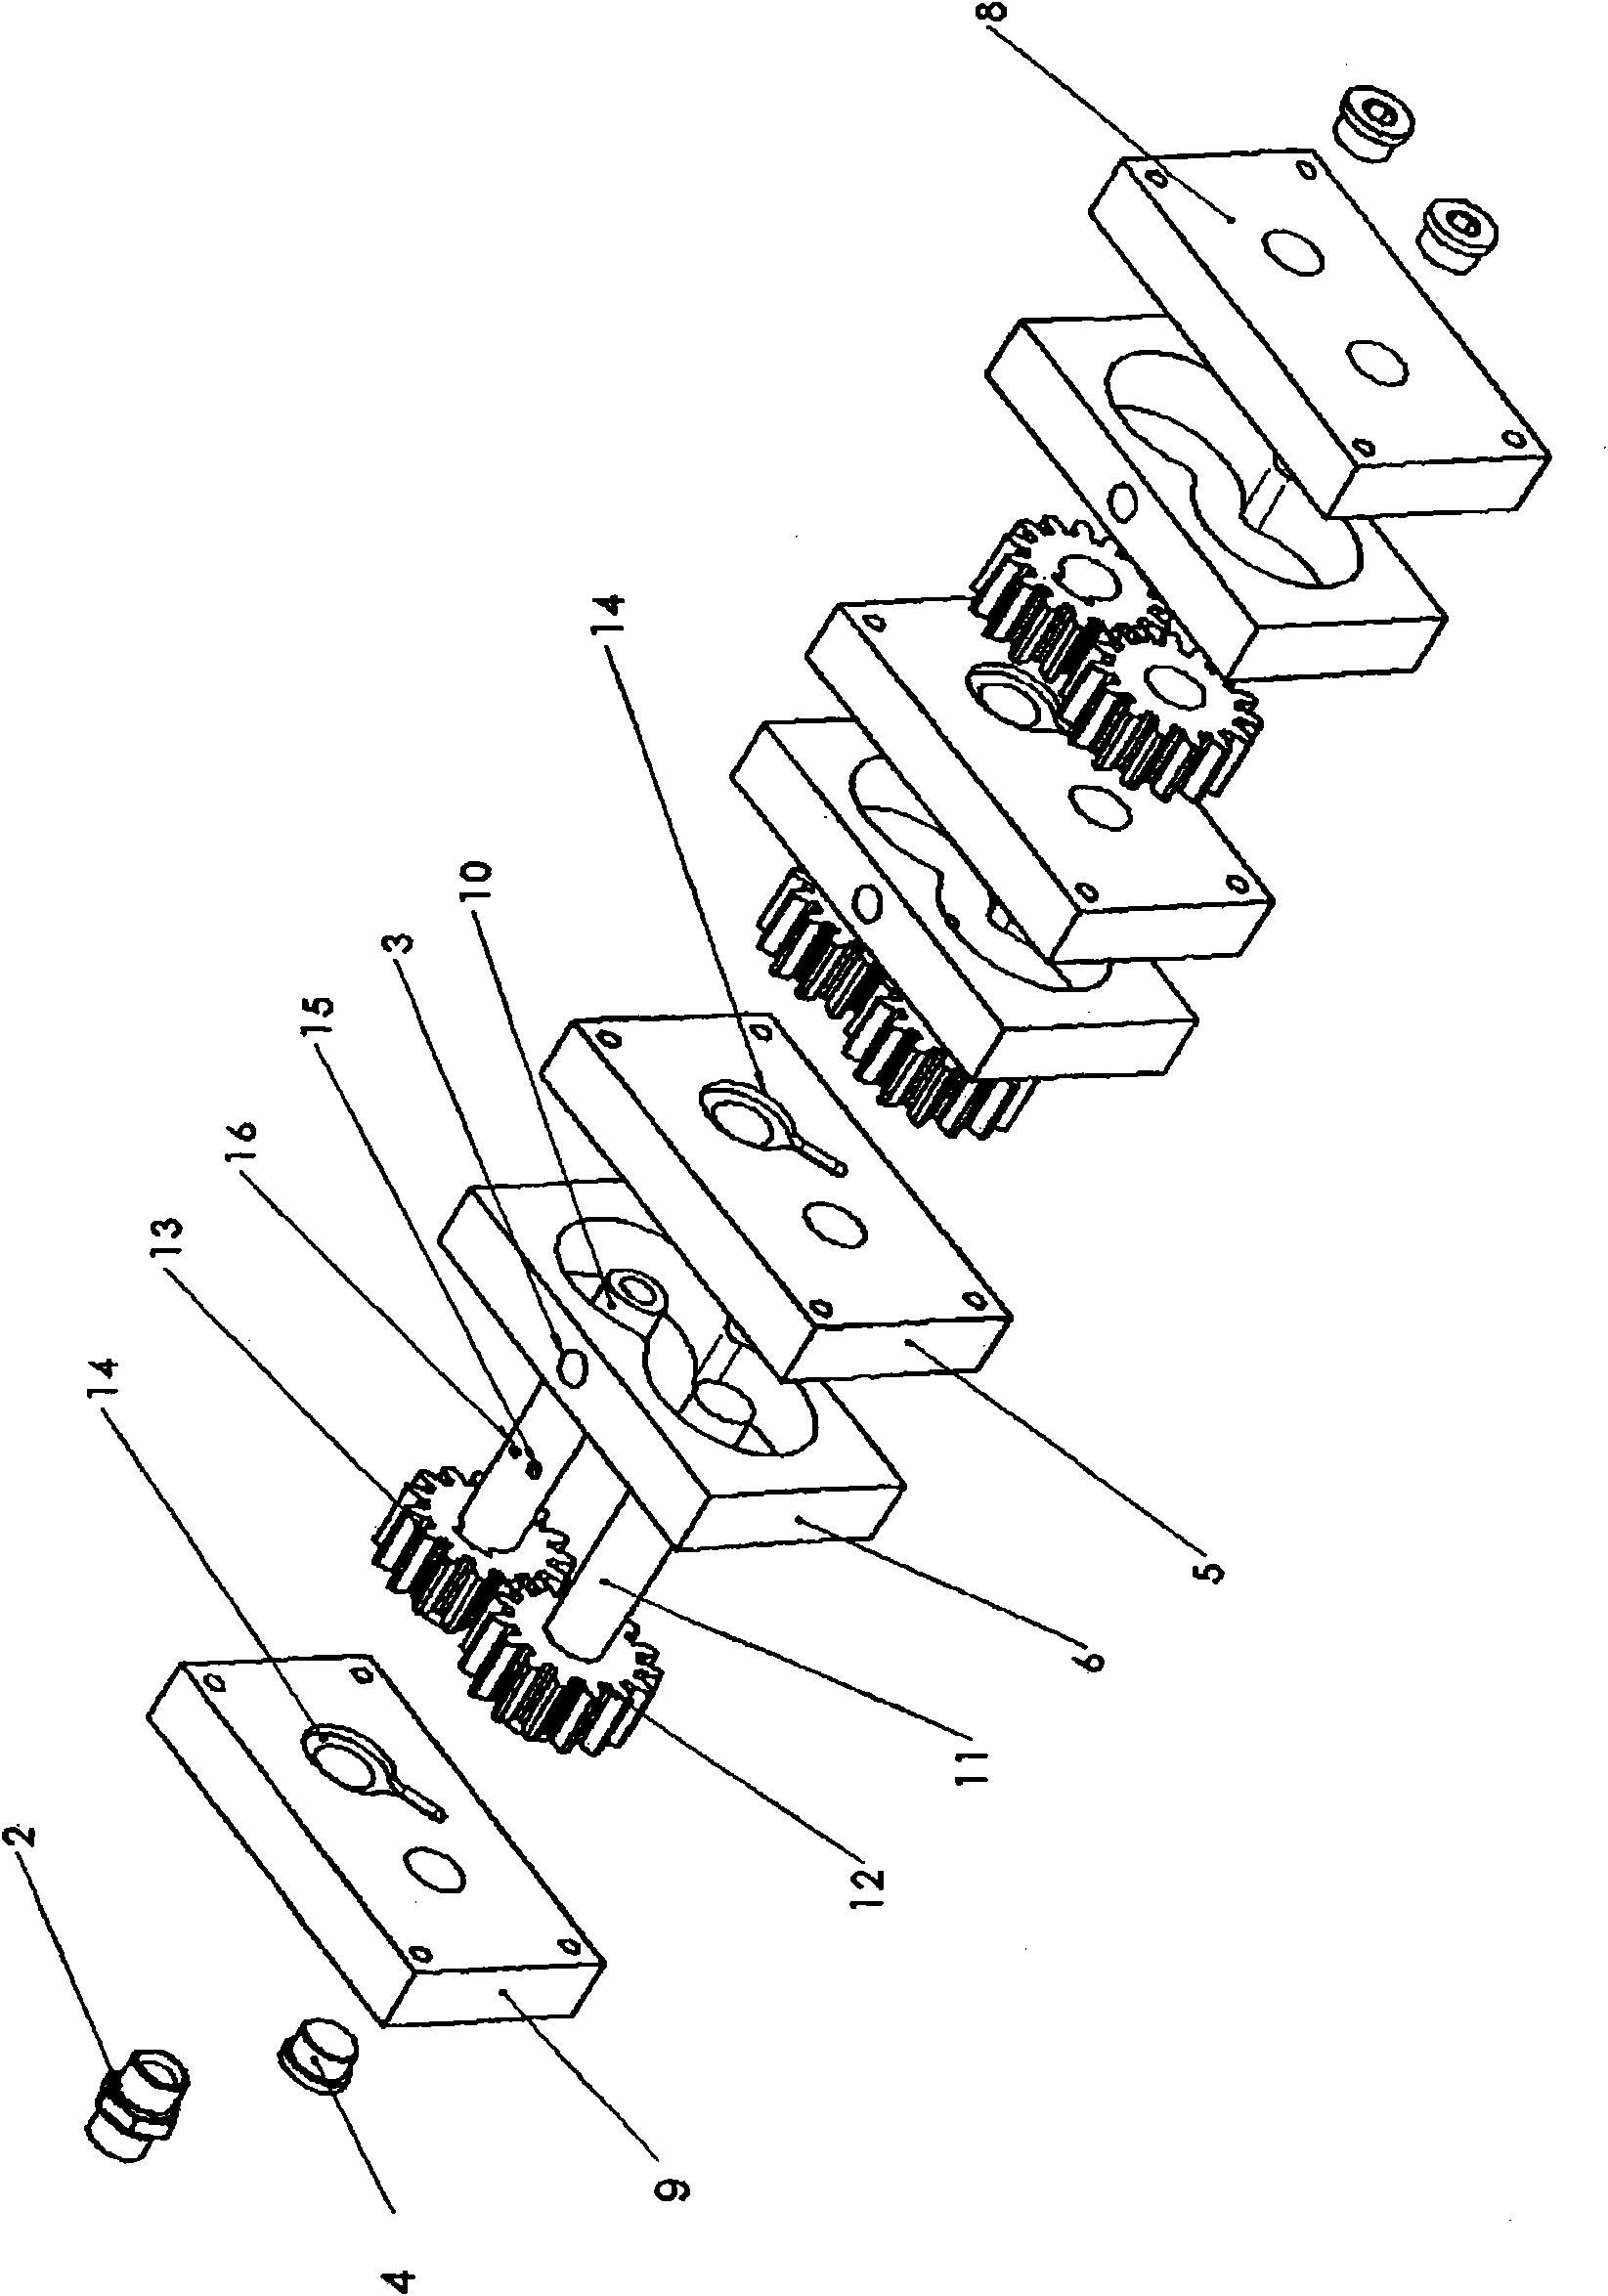 Device for dividing a flow equally between two or more objects